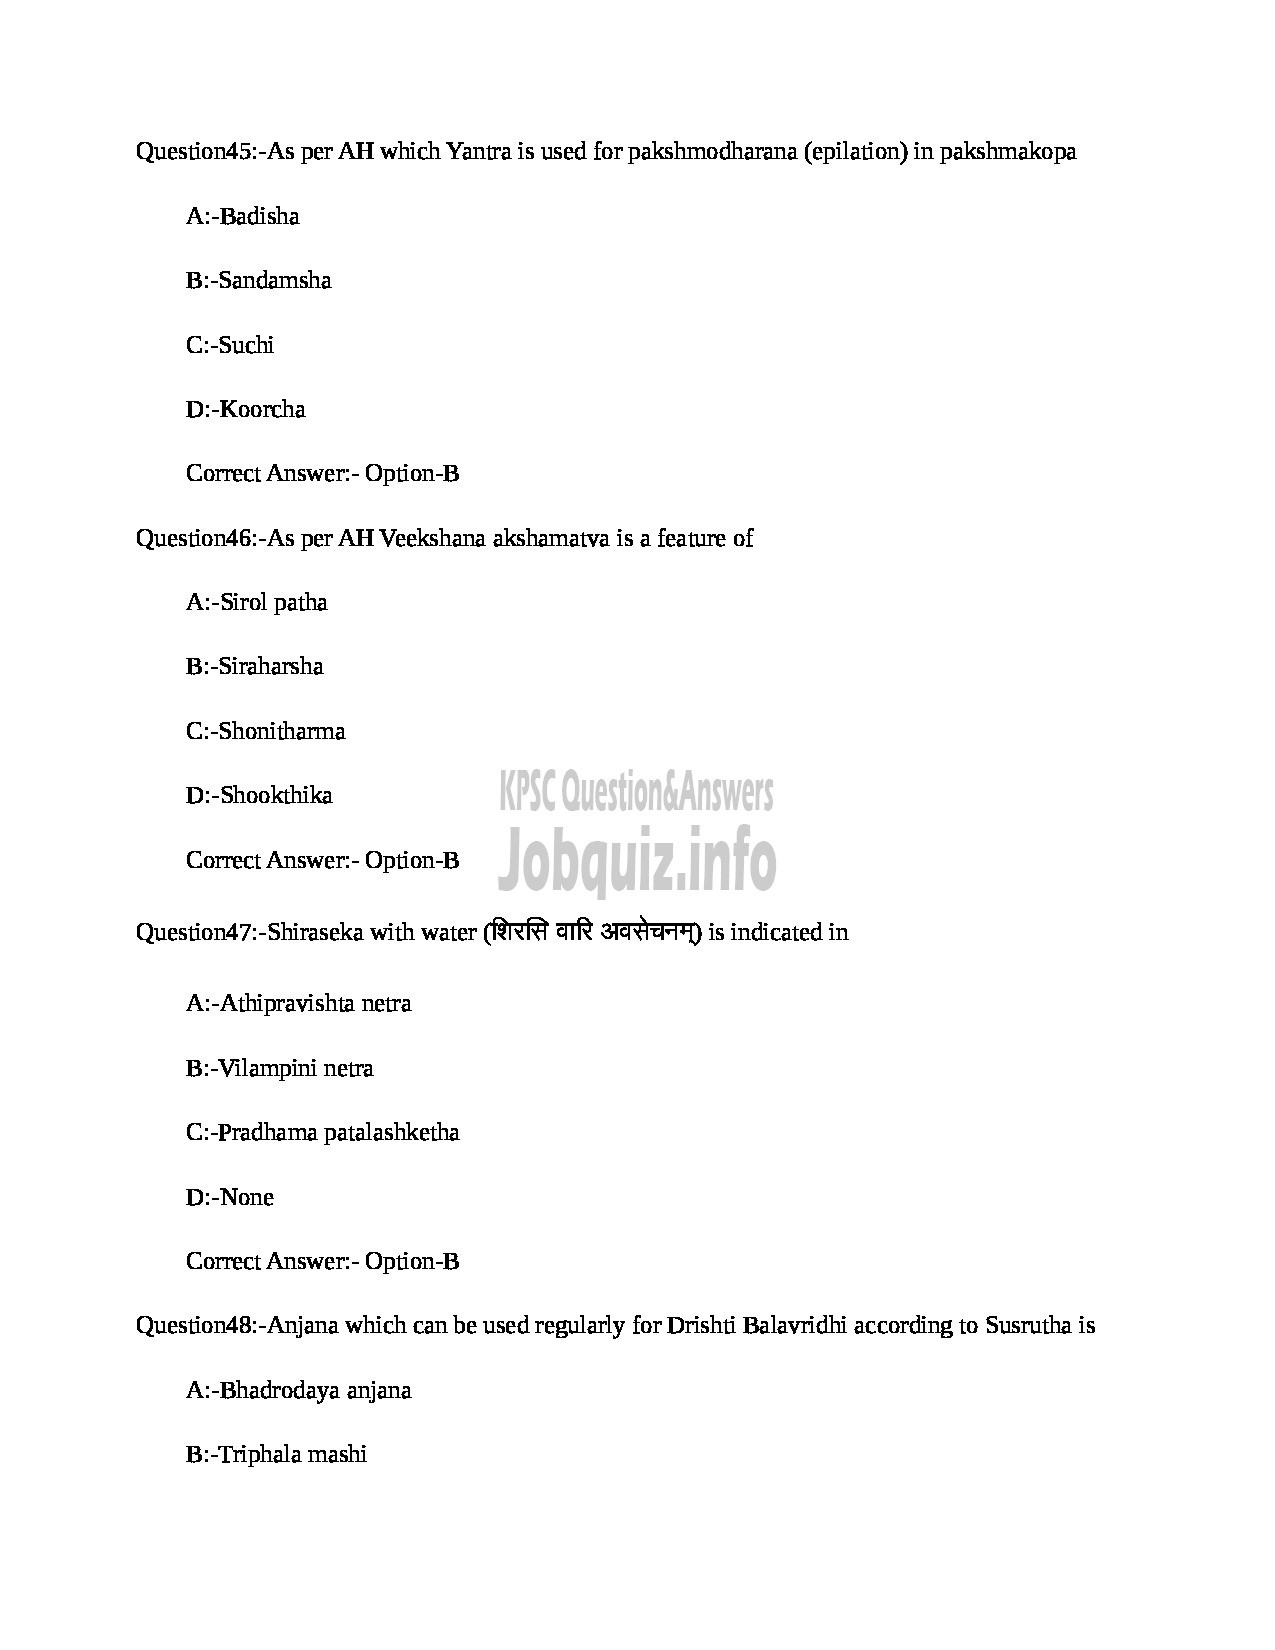 Kerala PSC Question Paper - MEDICAL OFFICER (NETRA) INDIAN SYSTEMS OF MEDICINE-14